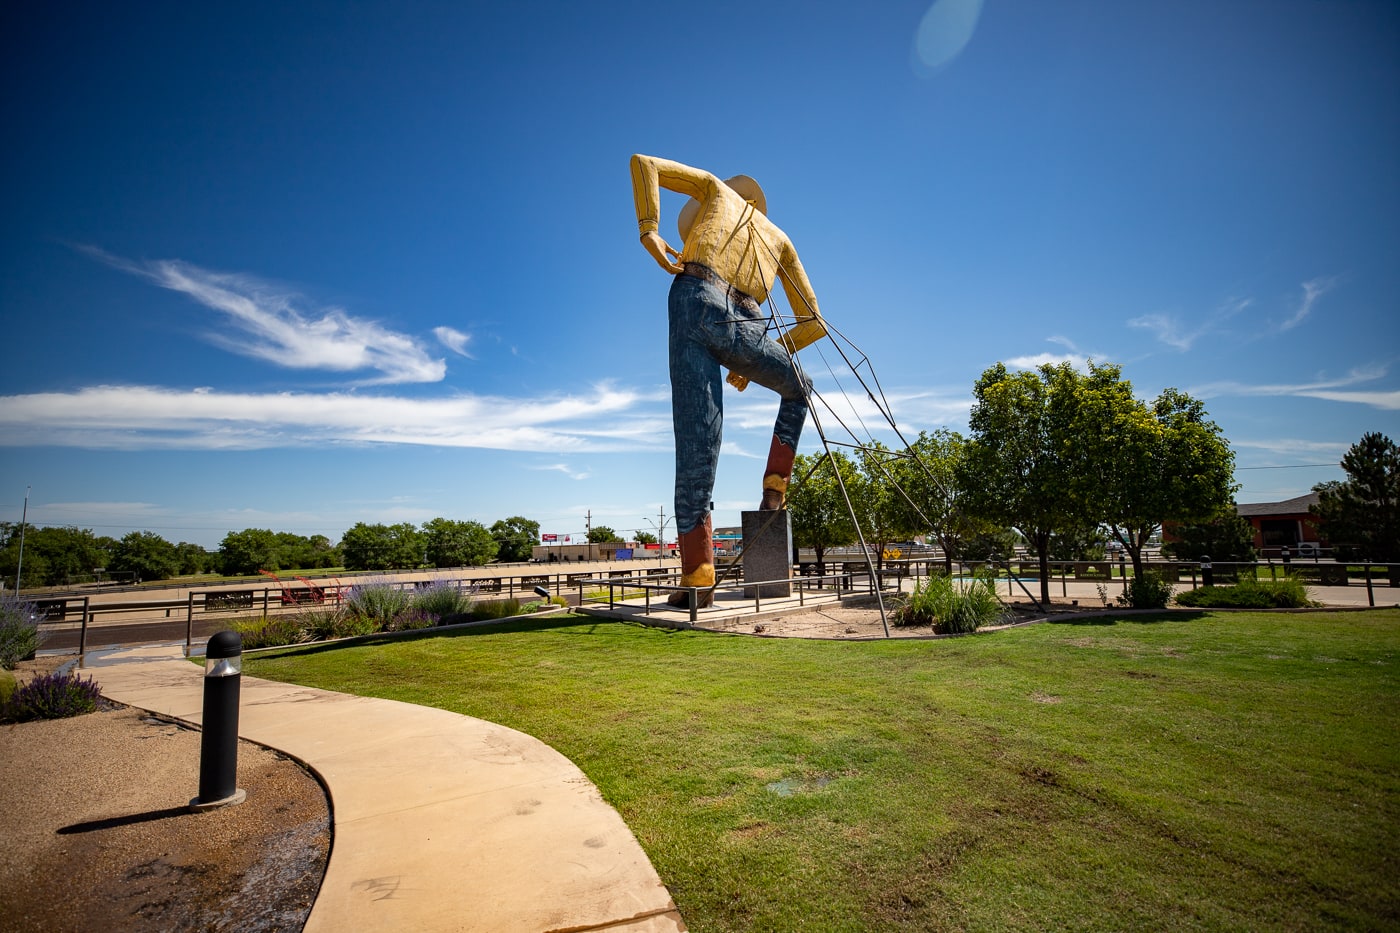 Tex Randall Statue in Canyon, Texas Roadside Attraction